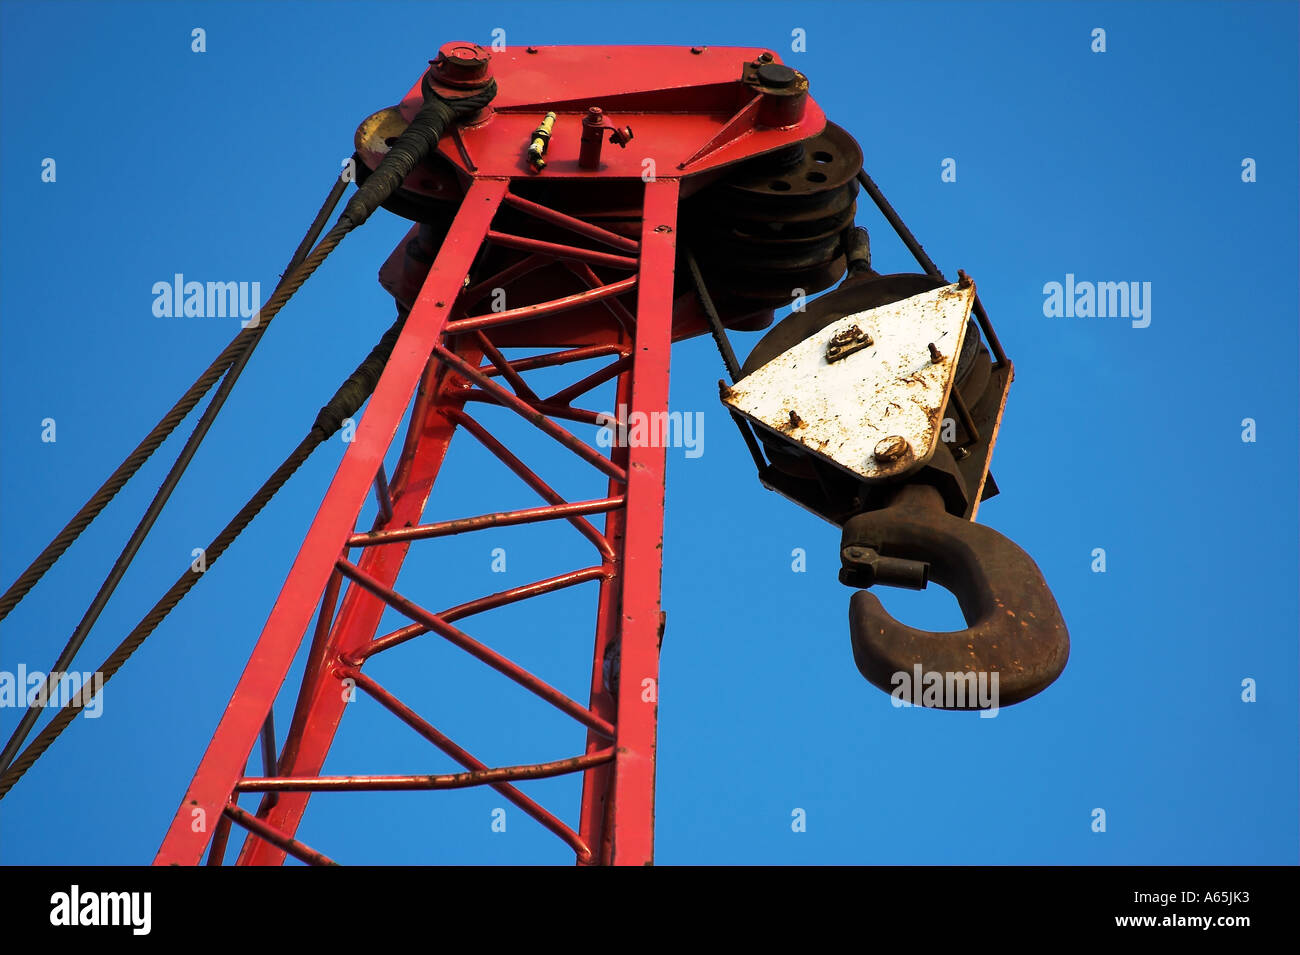 A close up view of the top of a crane with hook, cable and hoist wheels against a clear blue sky Stock Photo